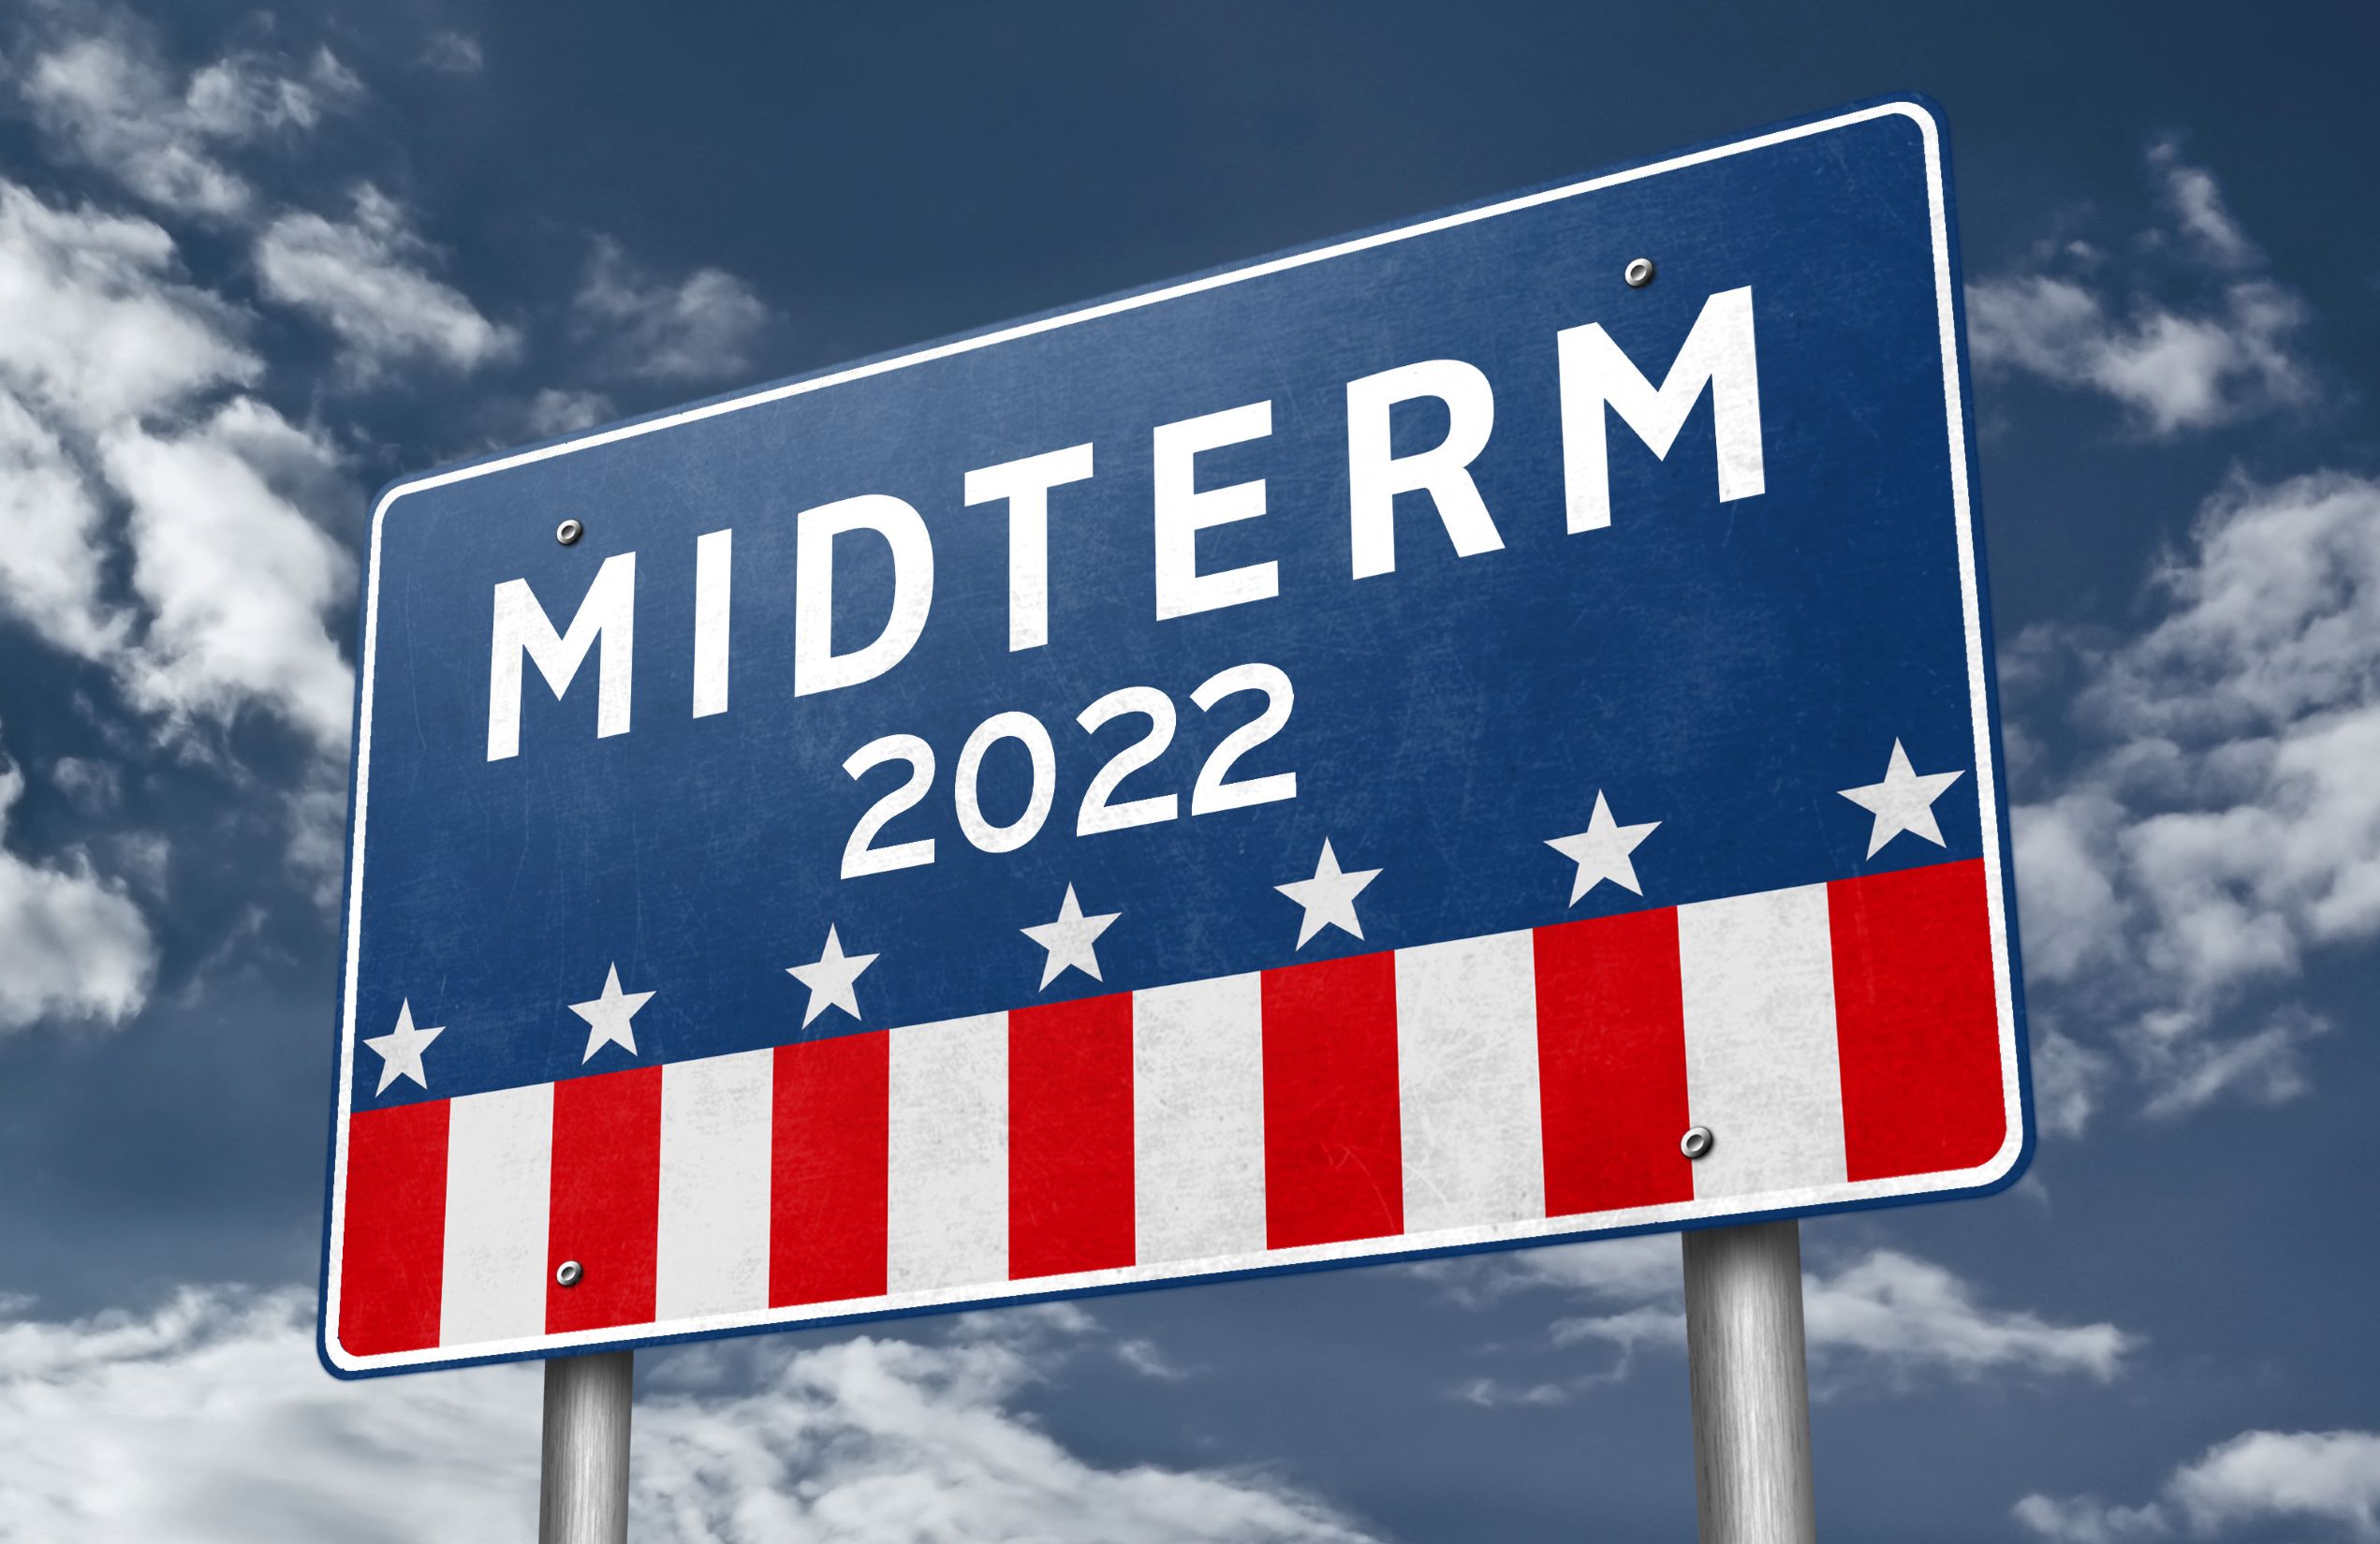 Street sign that reads Midterm 2022 on a background of stars and stripes like the American flag